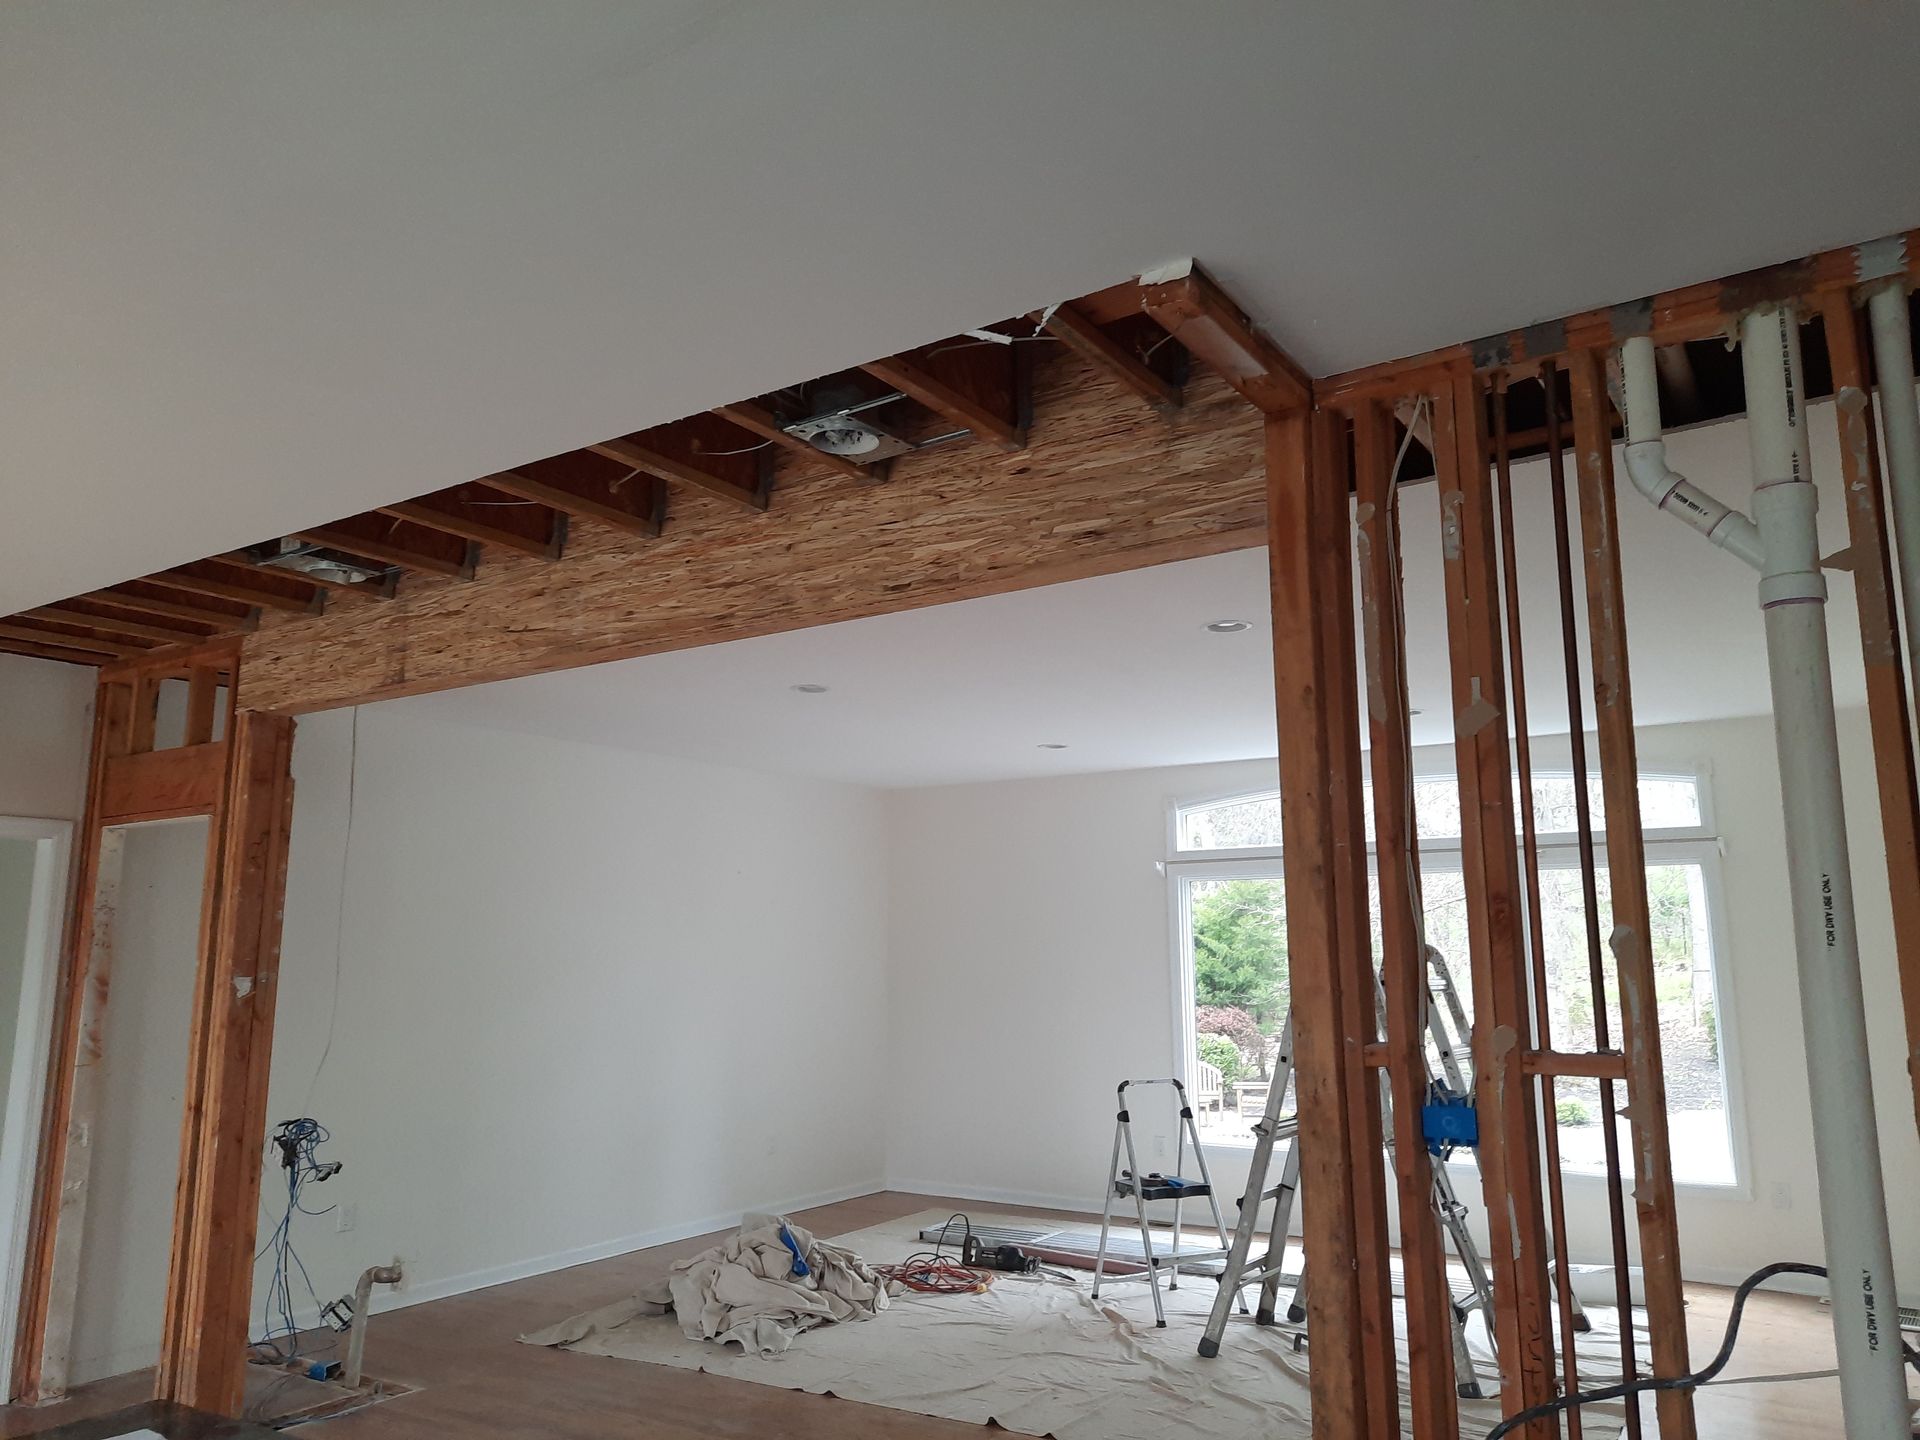 Load Bearing Wall Design and Removal